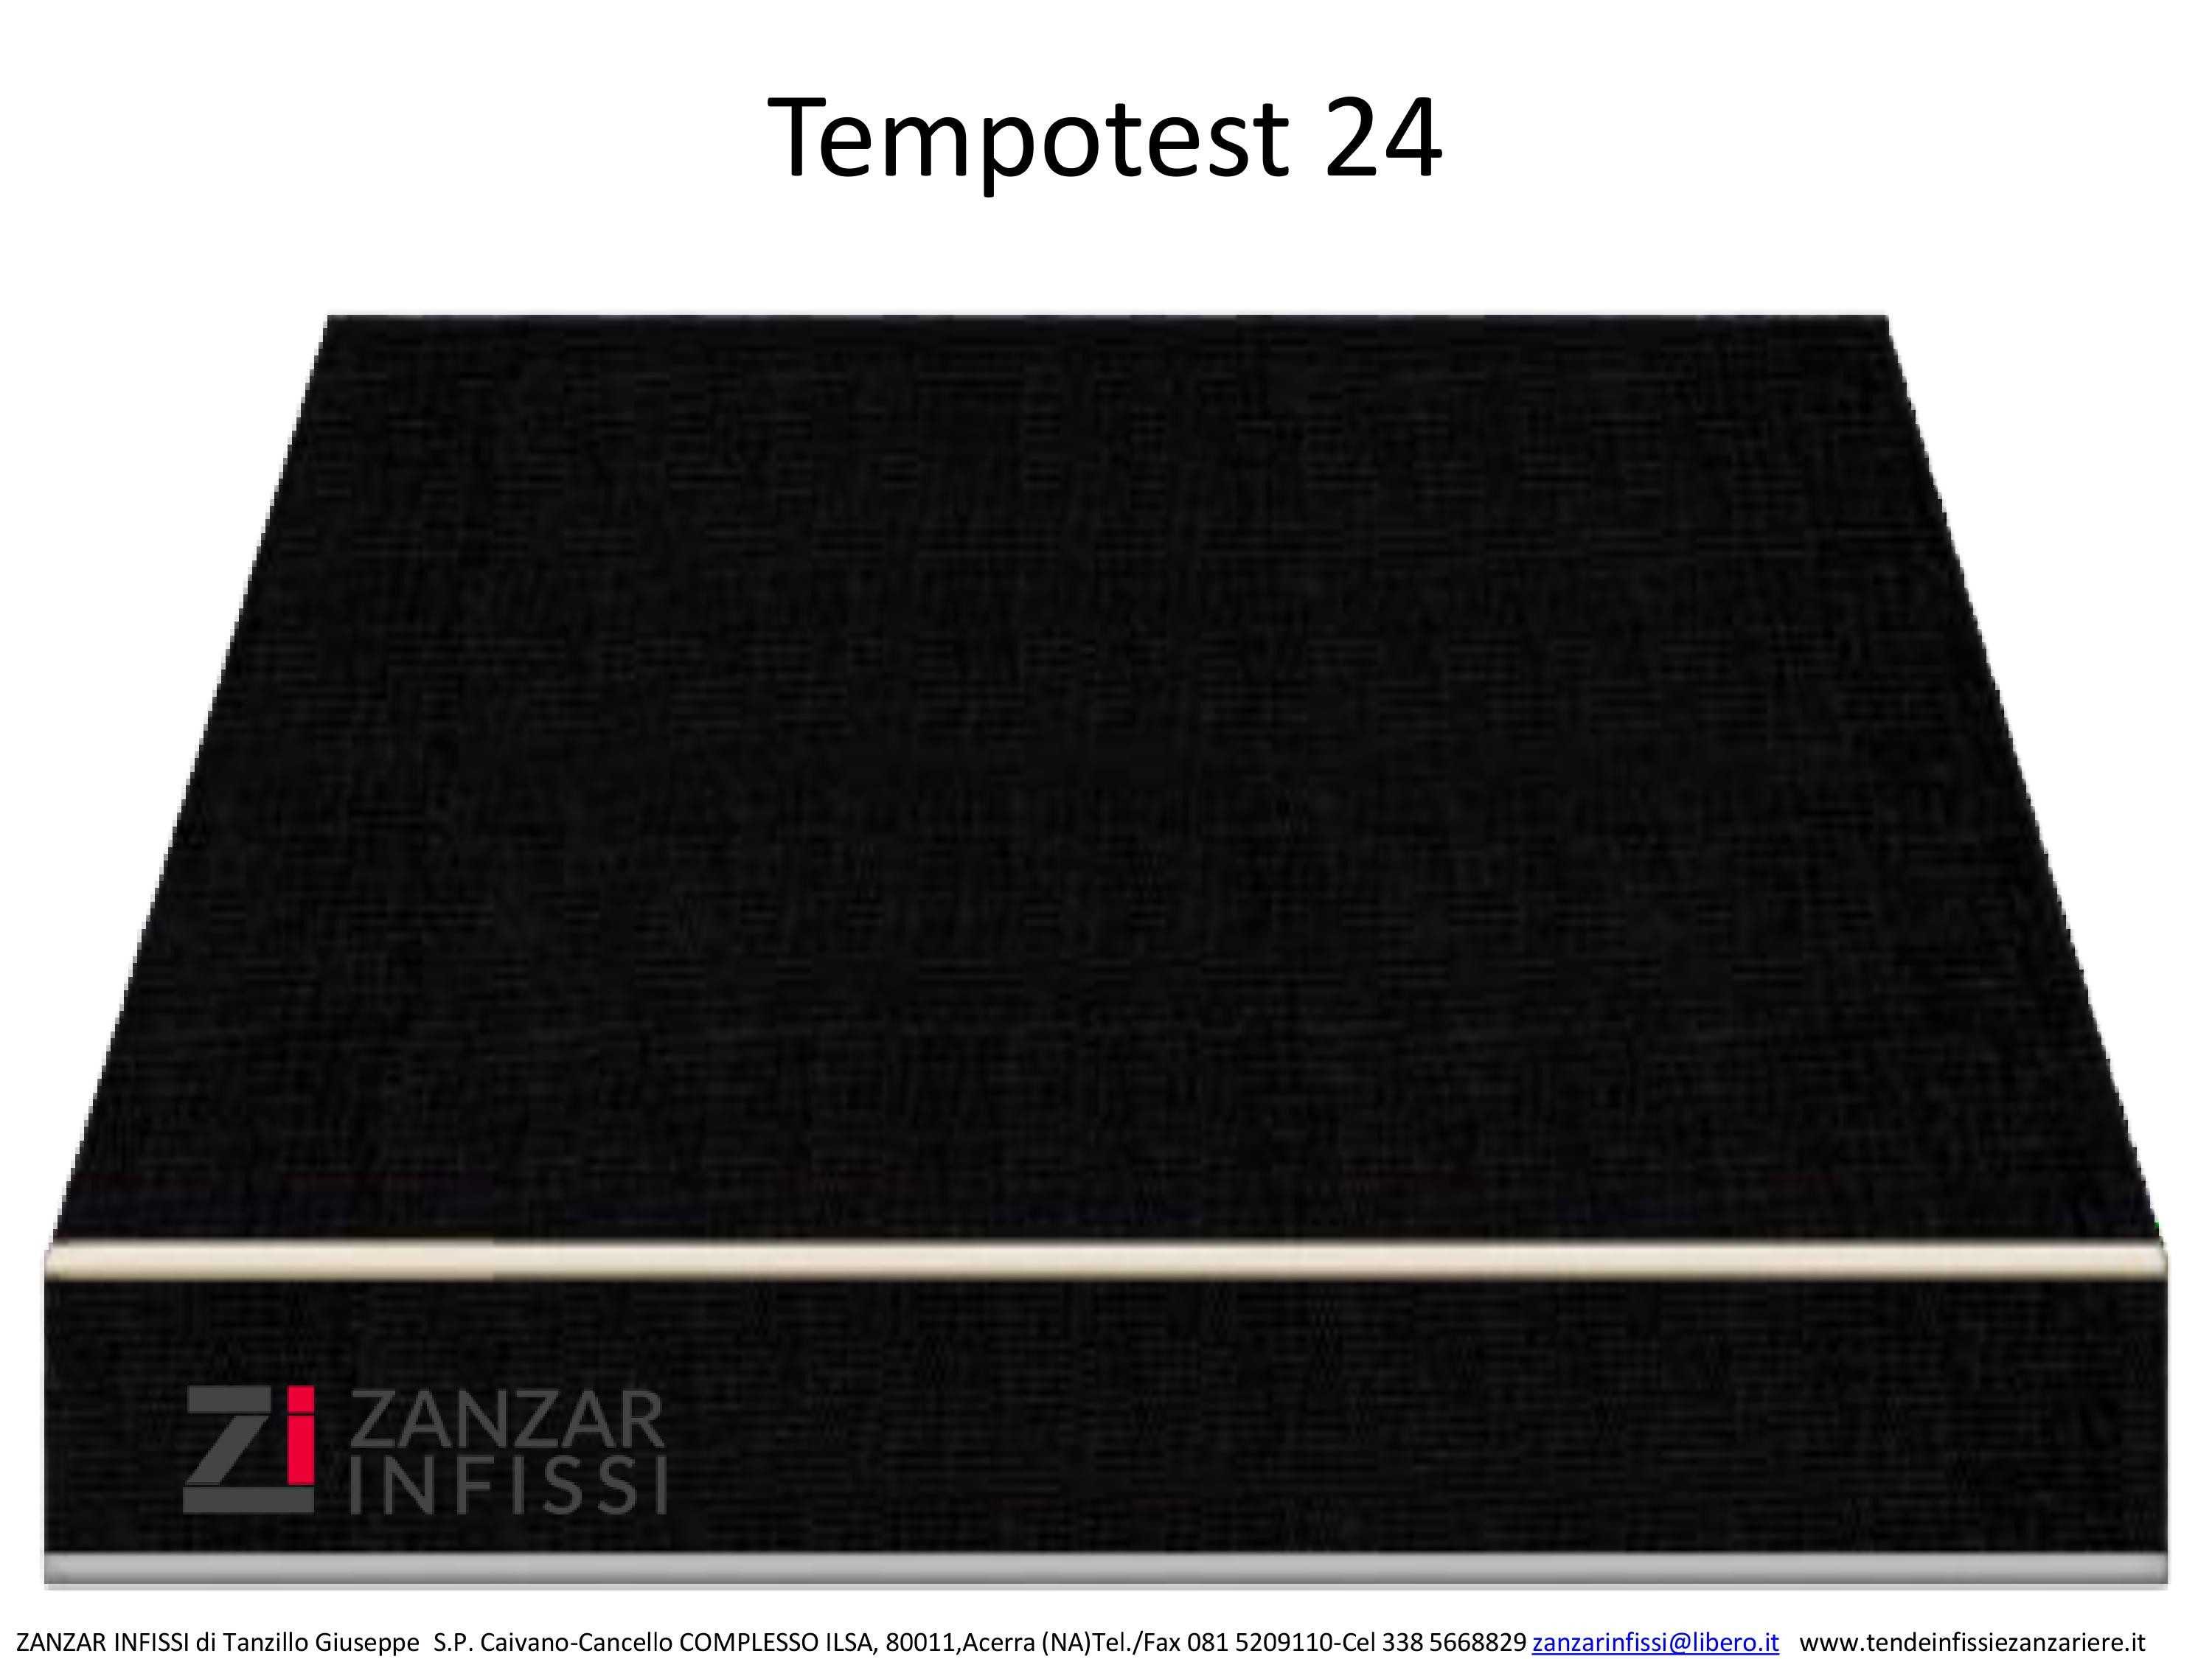 Tempotest 24